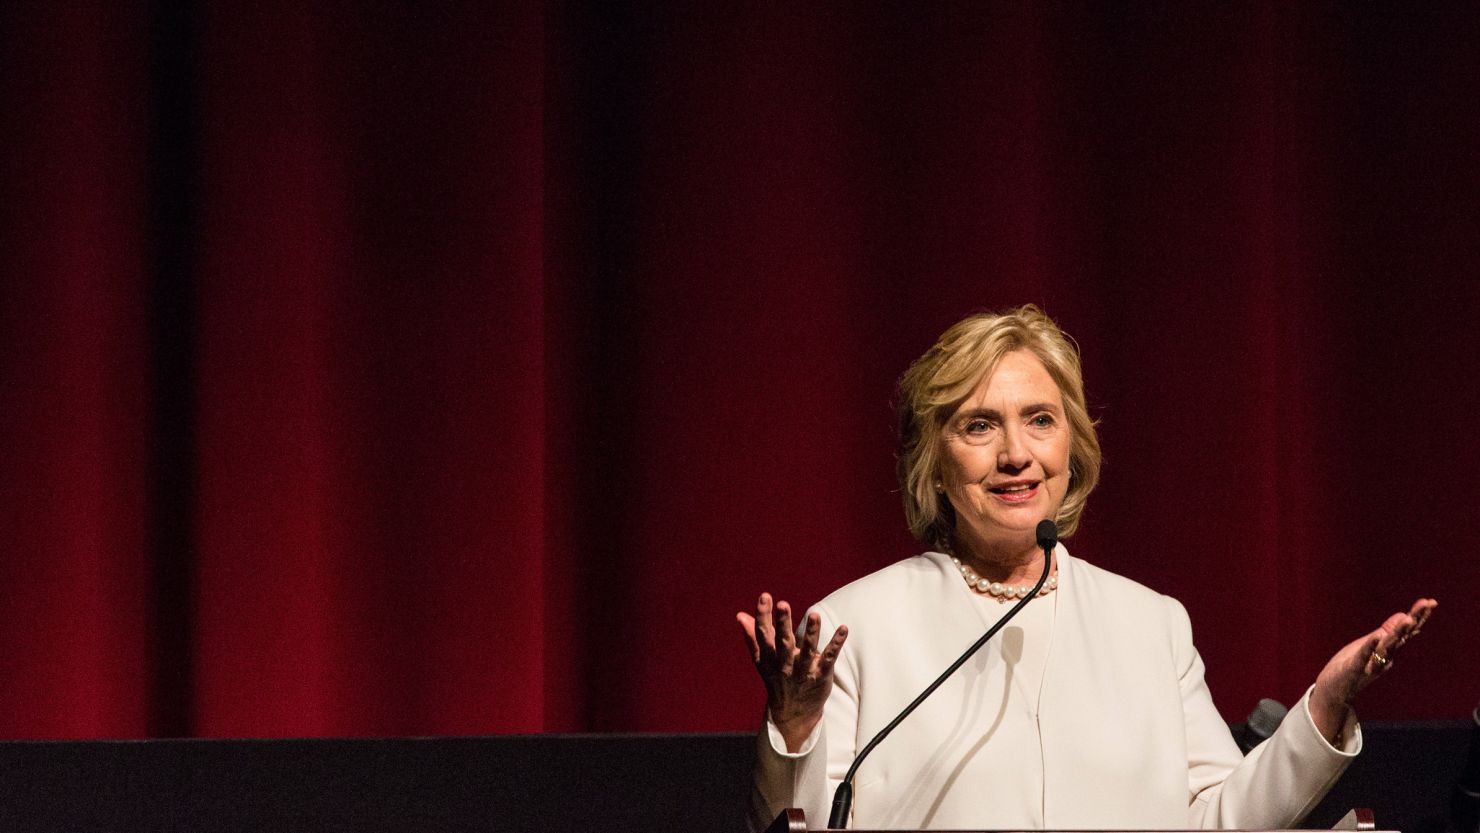 Democratic presidential hopeful Hillary Clinton speaks at the premier of the documentary film "Makers: Once and For All" at the School of Visual Arts on November 19, 2015 in New York City.